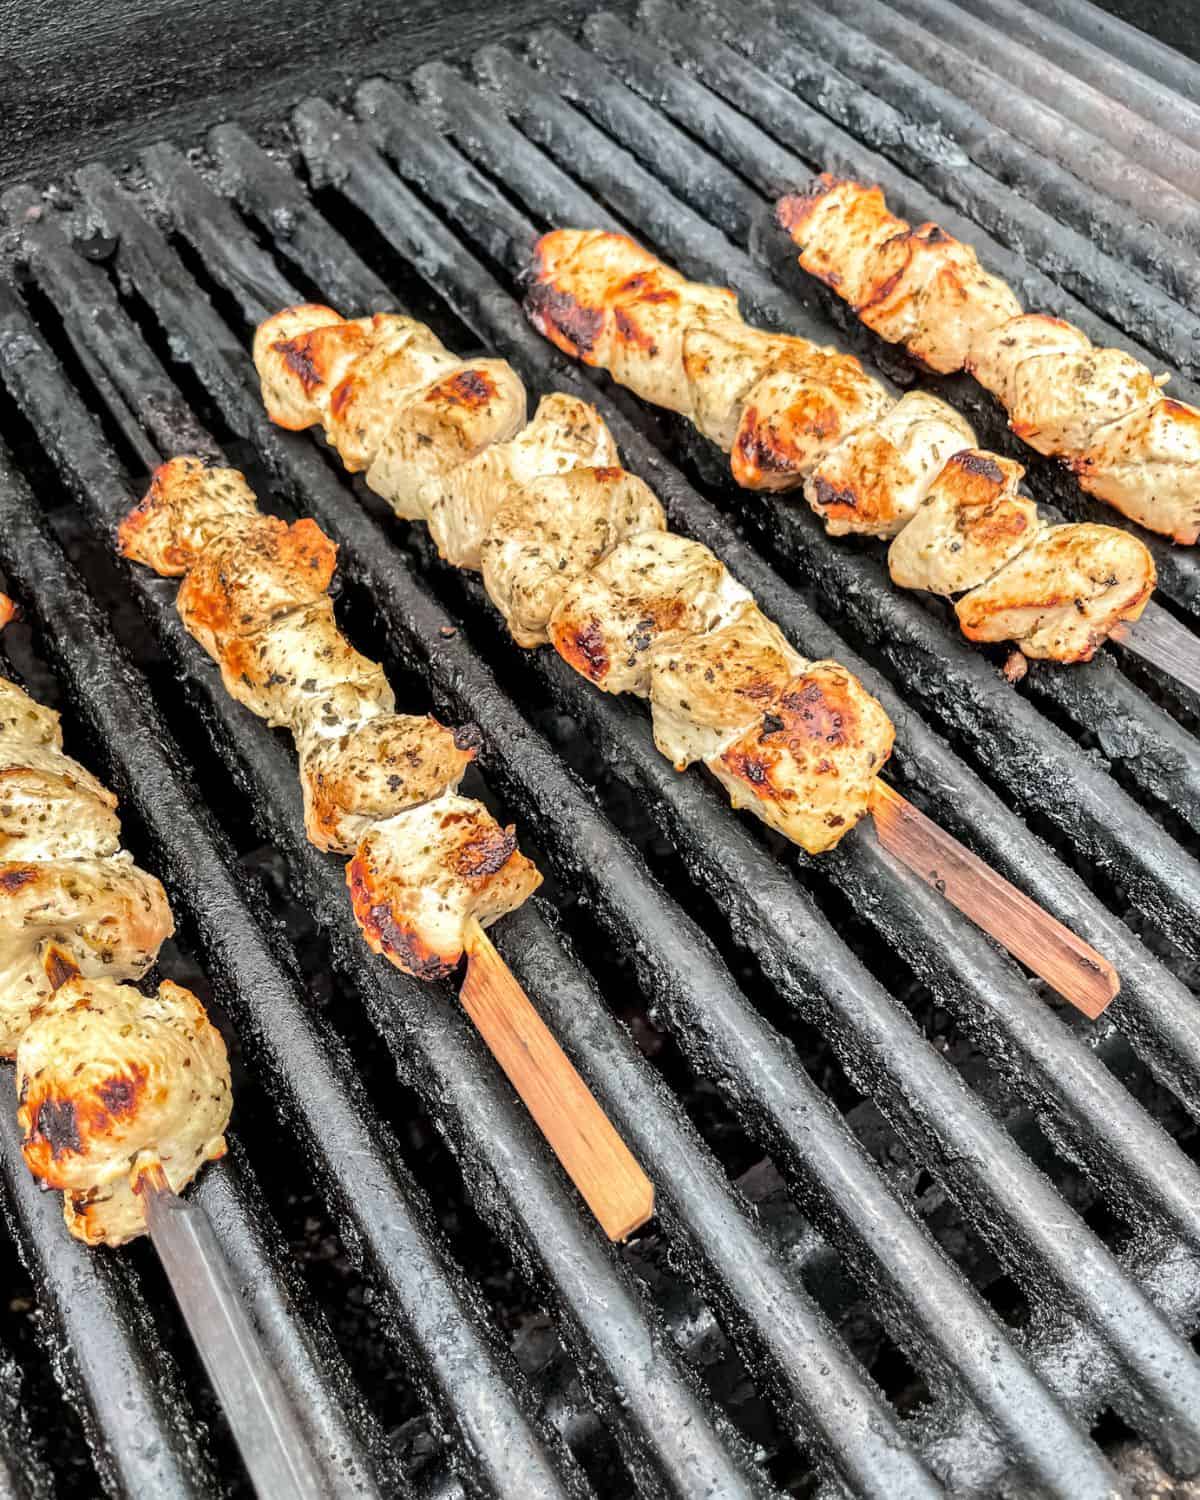 Grilled chicken skewers on the grill.